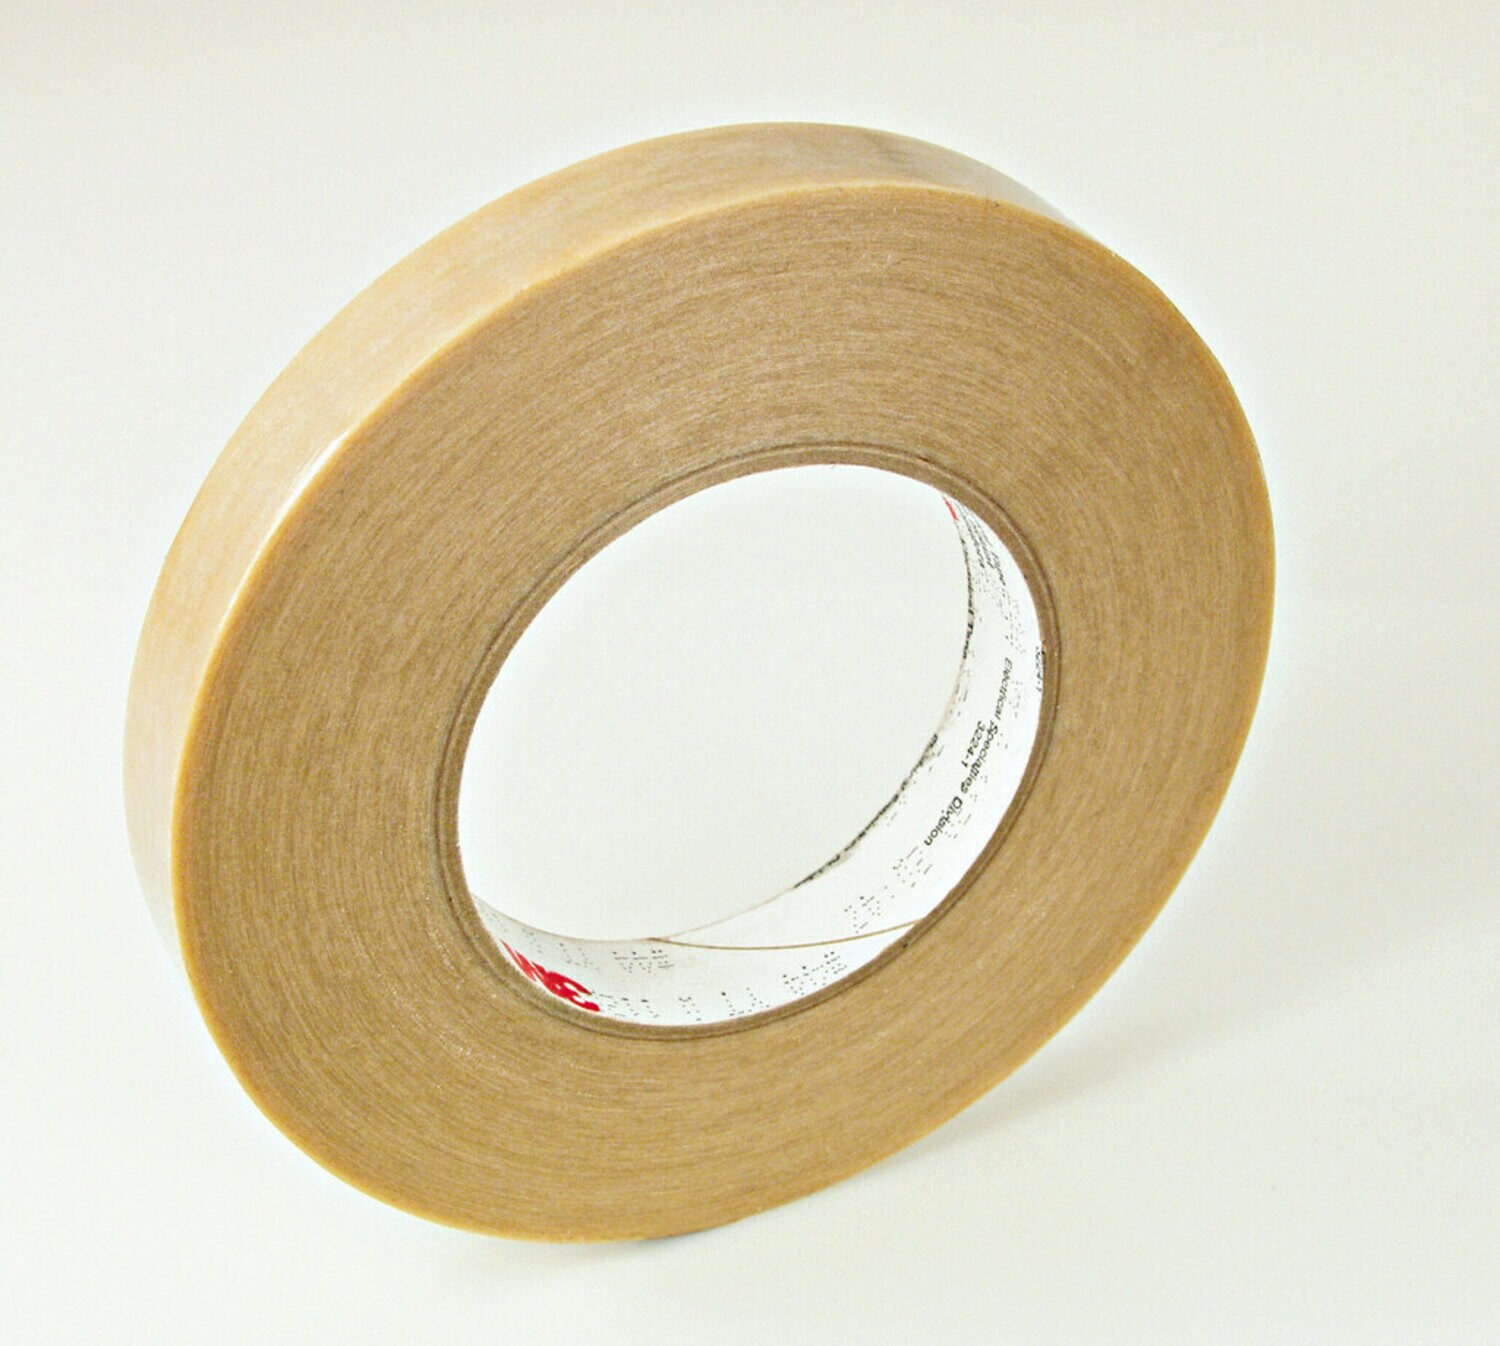 7010399906 - 3M Composite Film Electrical Tape 44, 23-1/2 in x 60 yd, 3 in Paper
Core, Log Roll, 1 Roll/Case